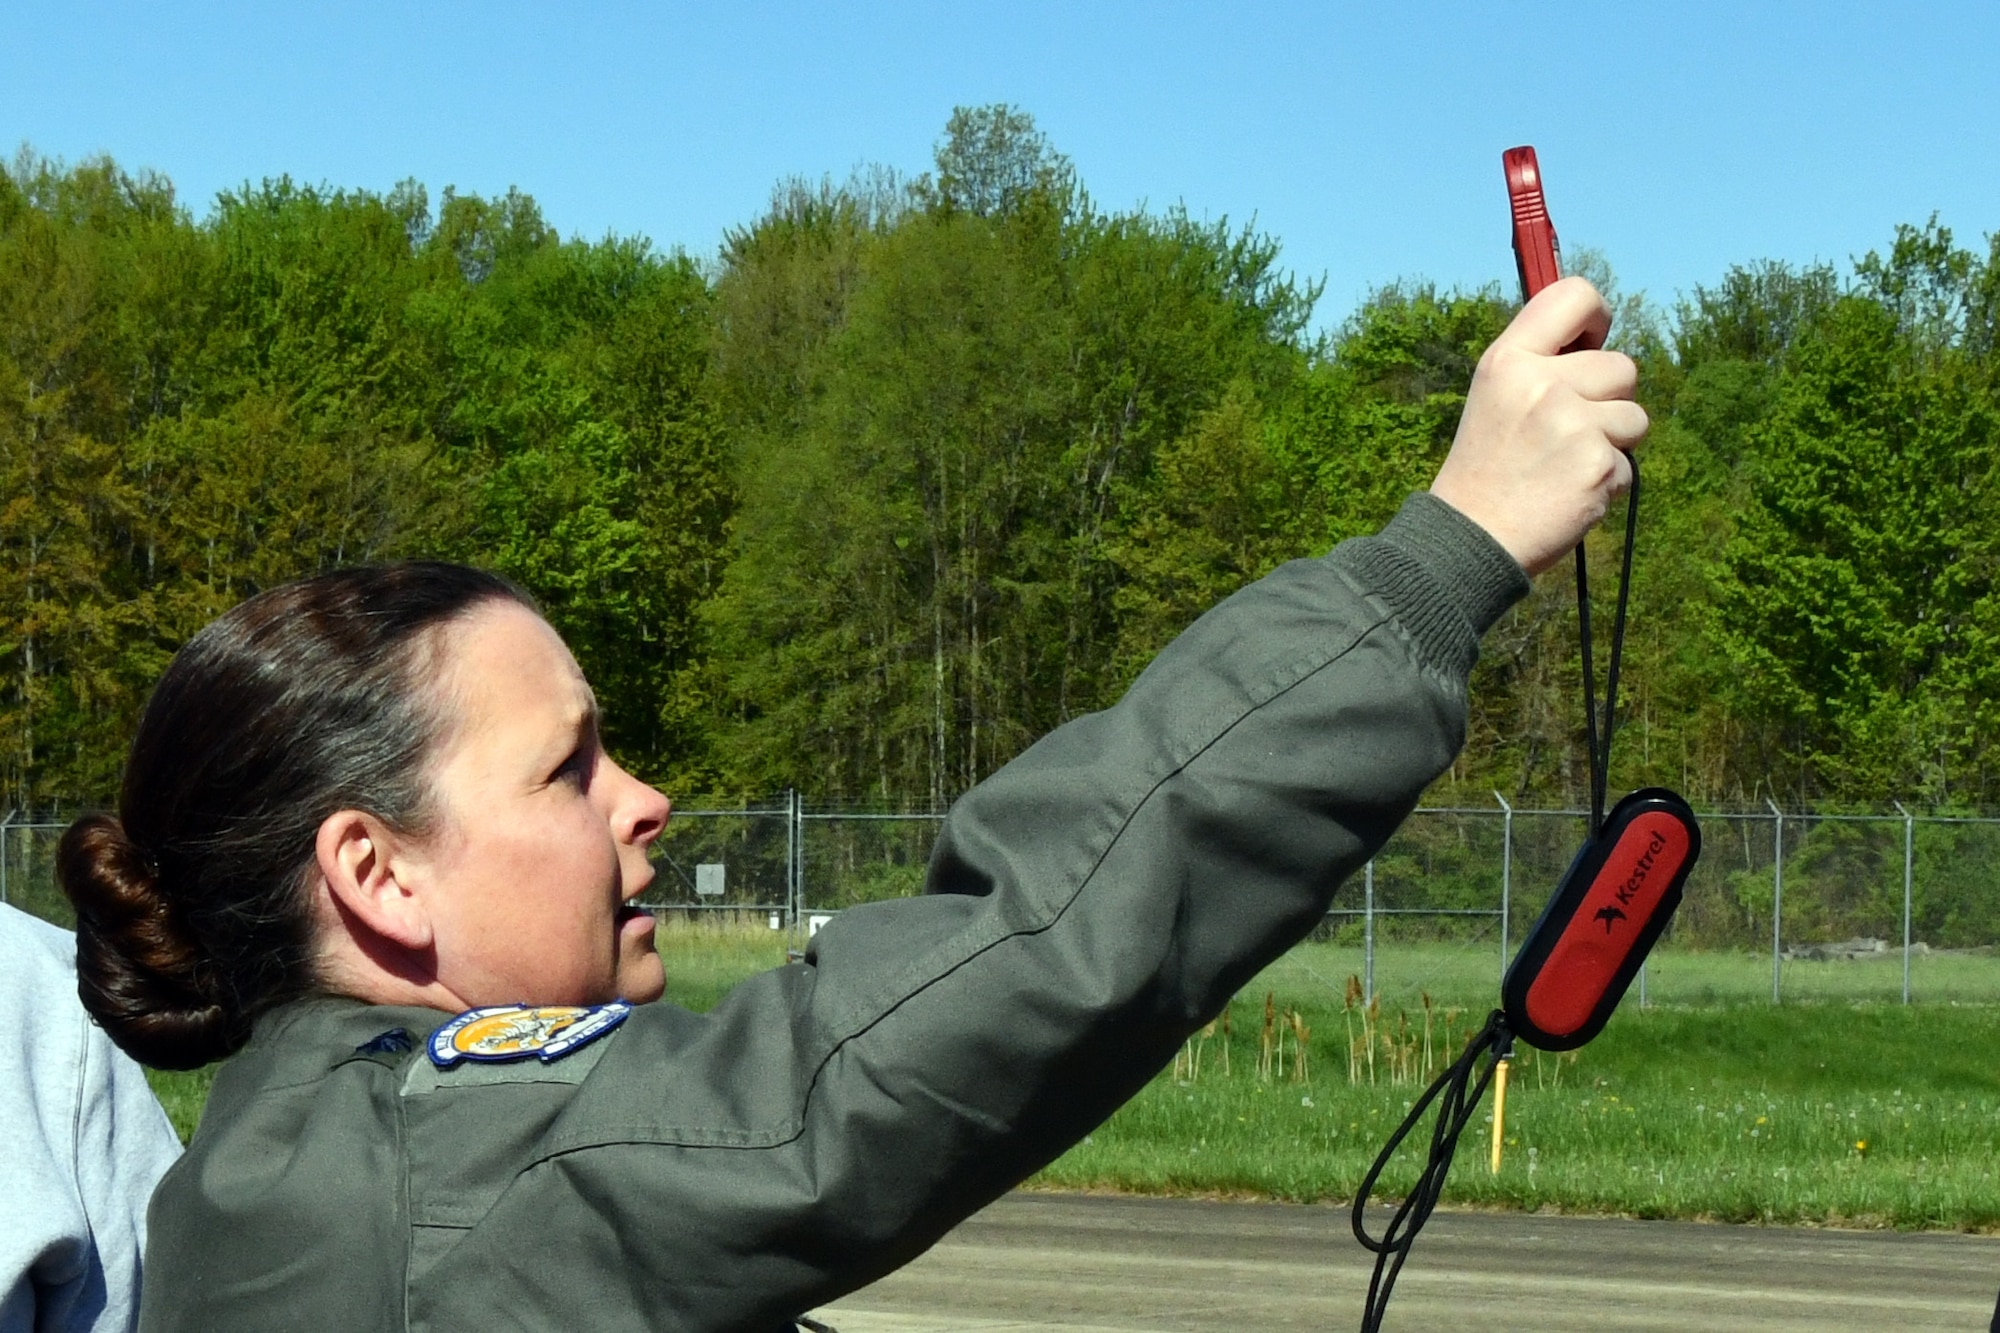 The Aerial Spray Application Course was held May 3-6, 2021, at YARS, for a group of more than 20 pest management specialists from across the Department of Defense.